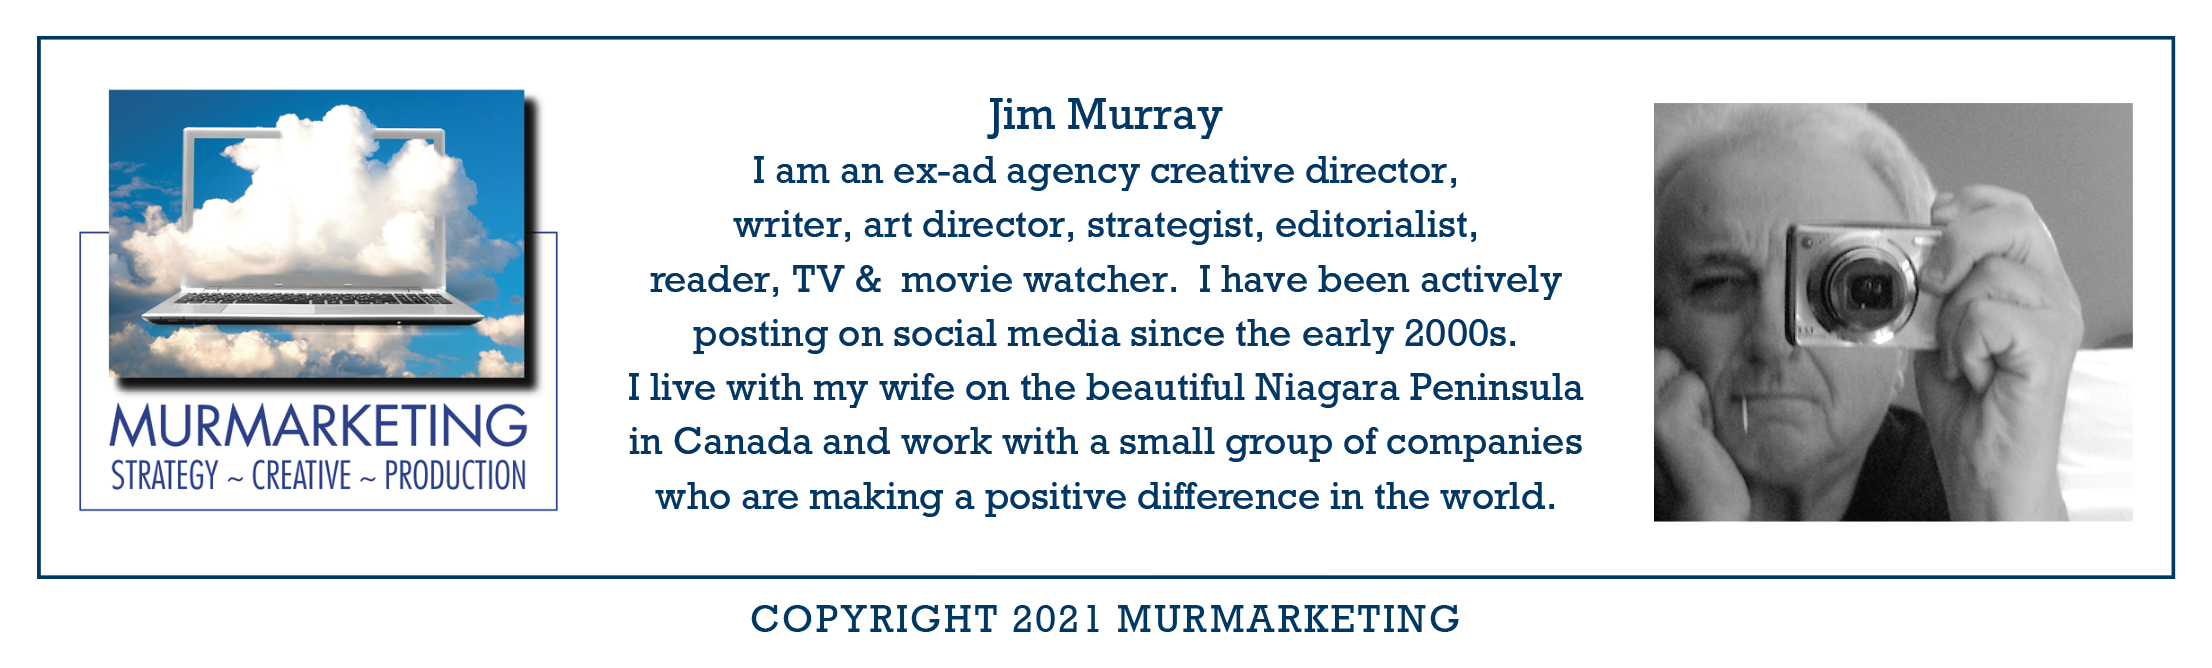 be
MURMARKETING
STRATEGY ~ CREATIVE ~ PRODUCTION

 

 

Jim Murray
I am an ex-ad agency creative director,
writer, art director, strategist, editorialist,
reader, TV & movie watcher. I have been actively
posting on social media since the early 2000s.

I live with my wife on the beautiful Niagara Peninsula
in Canada and work with a small group of companies

who are making a positive difference in the world.

 

COPYRIGHT 2021 MURMARKETING